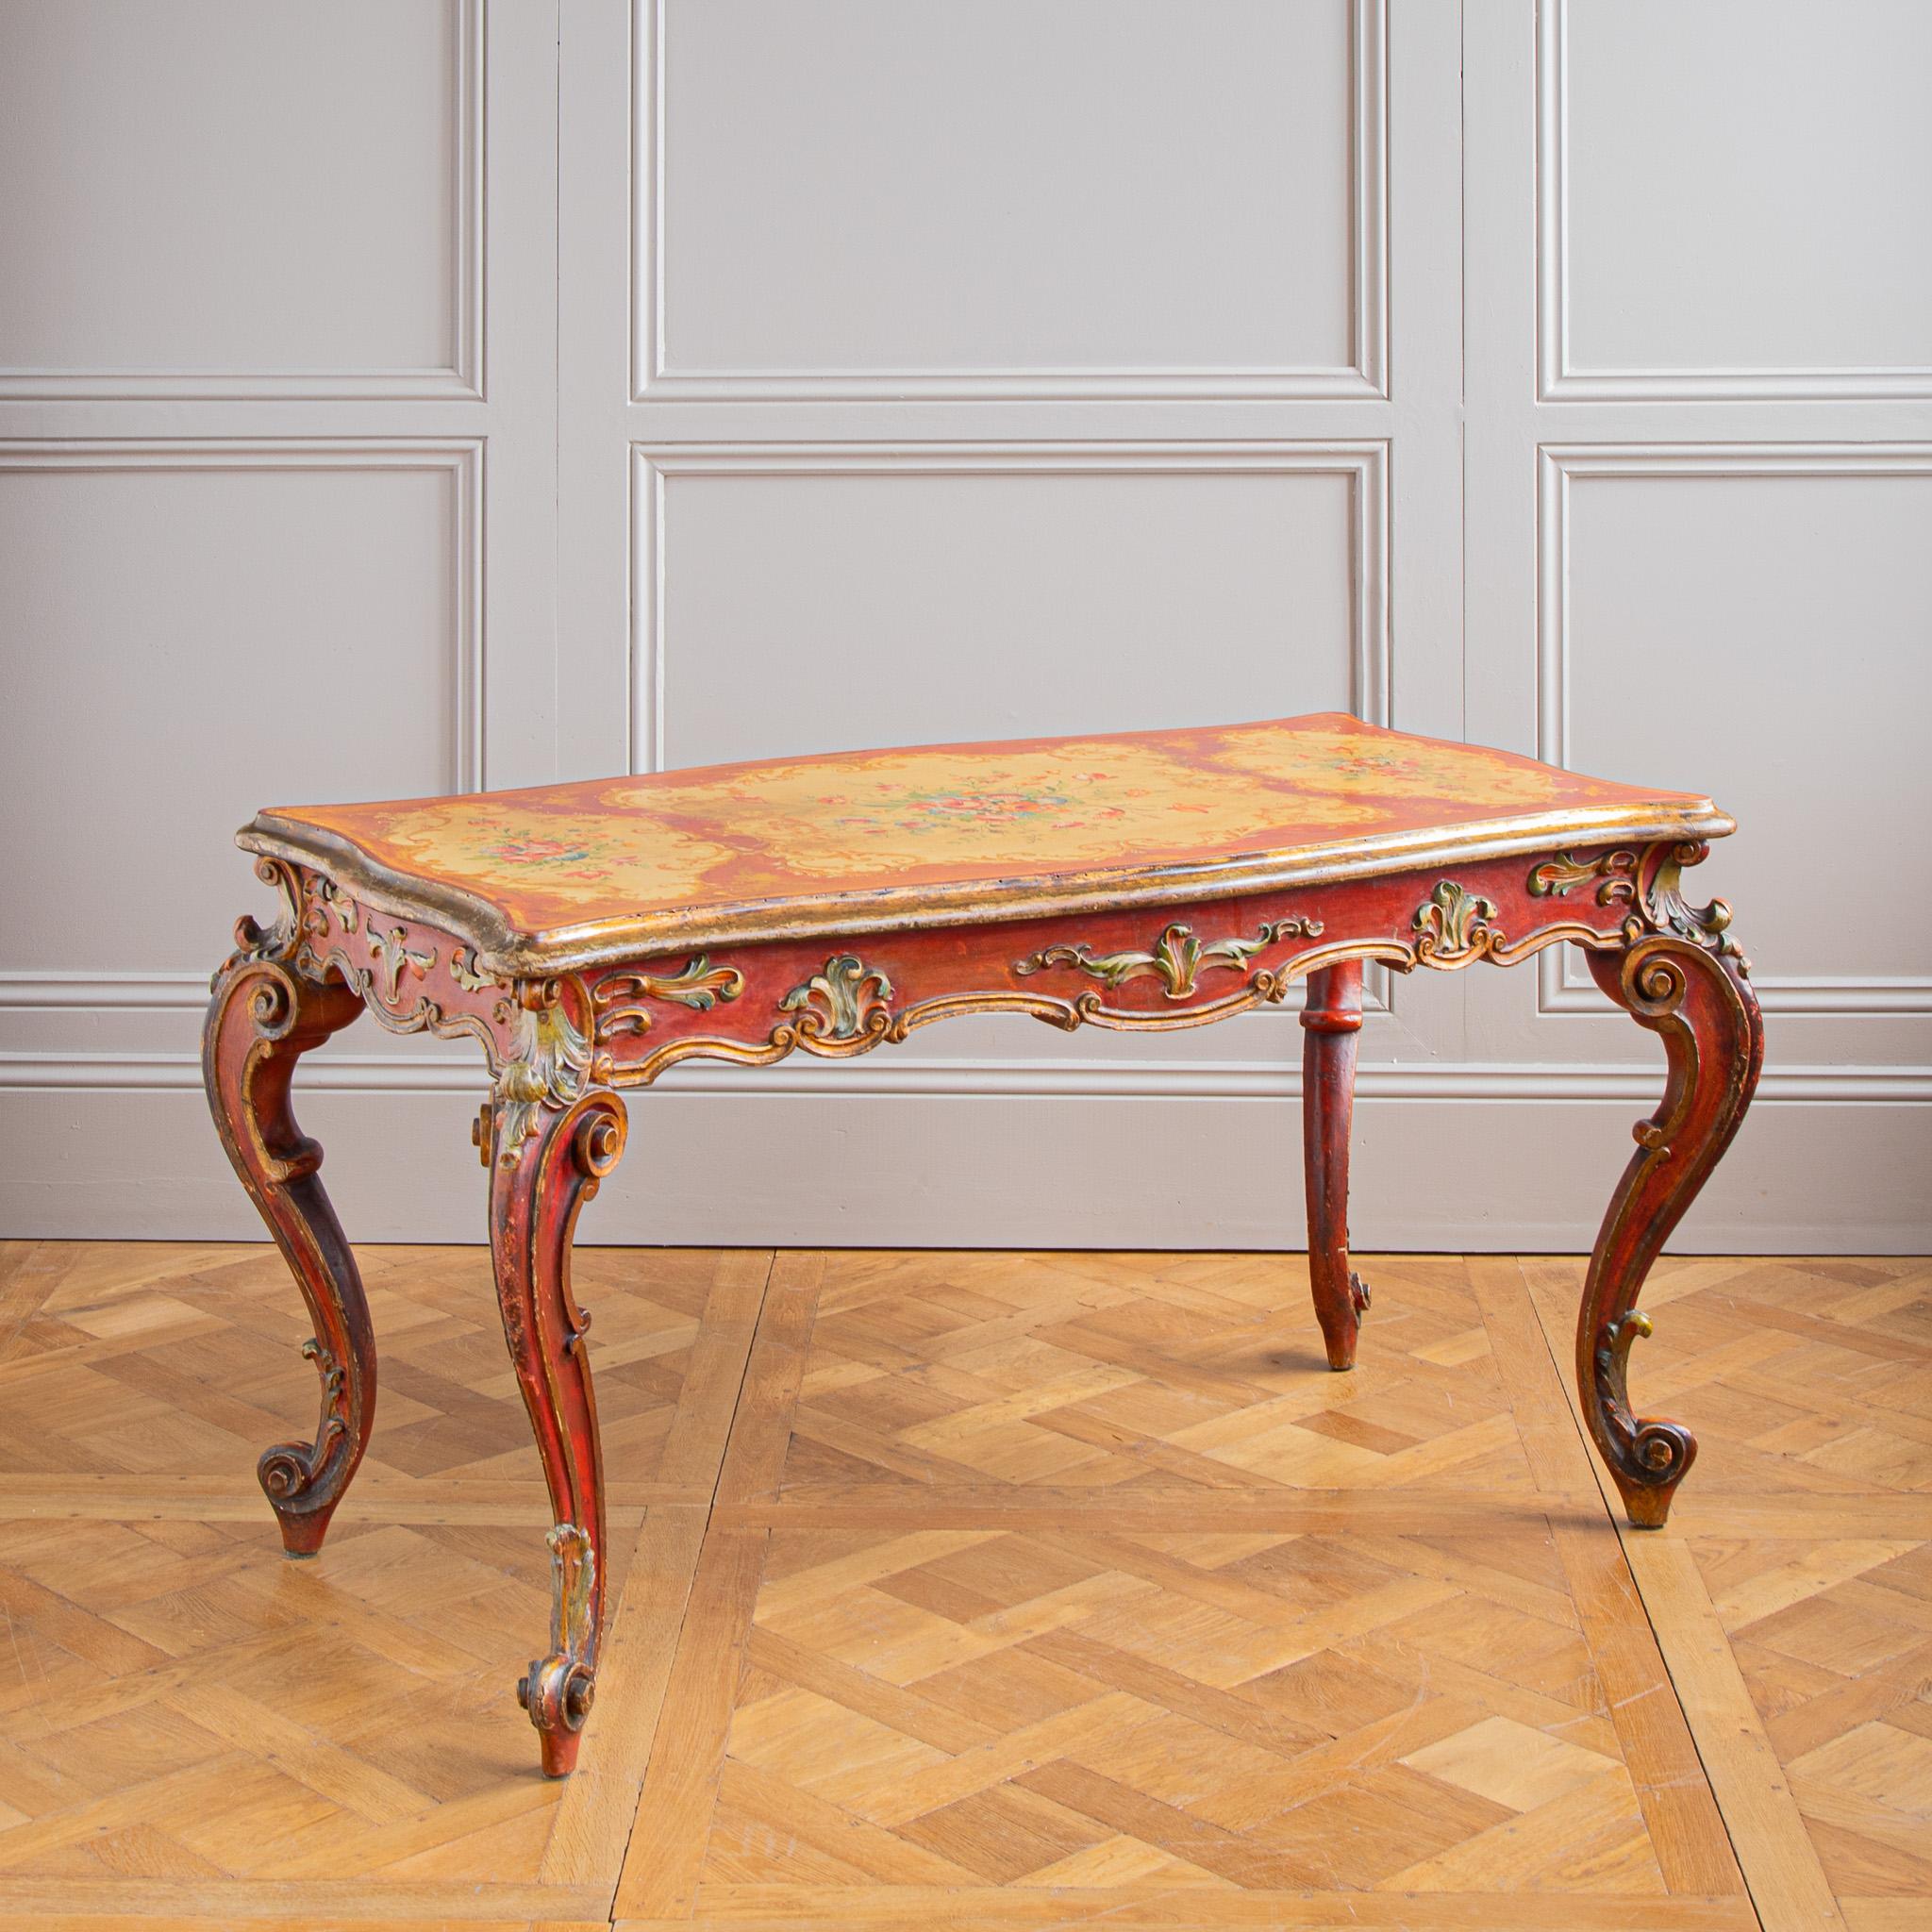 A Late 19th Century Table in the Rococo style, hand painted in the Venetian style. This Italian, table which could also be used as a desk features finely, hand-carved, scroll-work across the cabriole legs. The table’s apron has decorative carvings